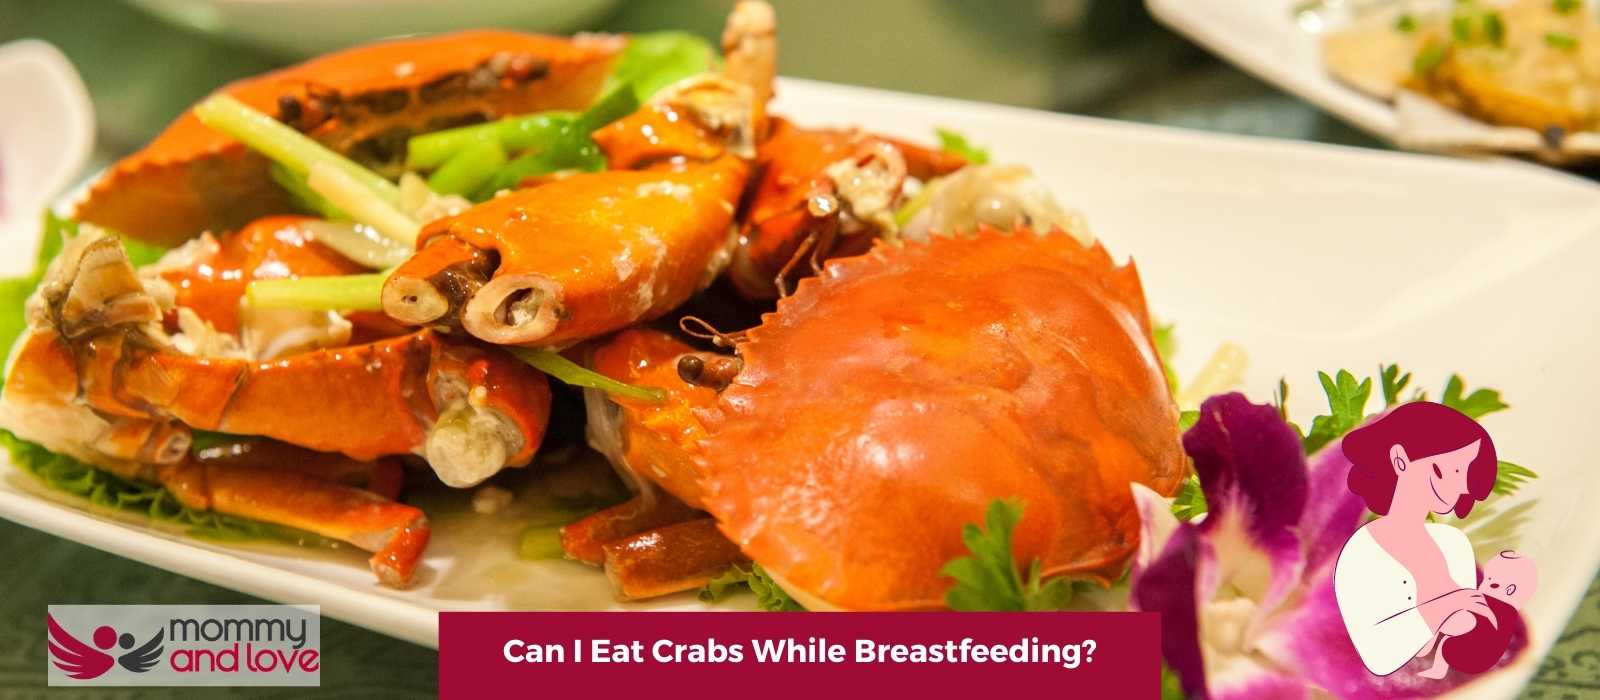 Can I Eat Crabs While Breastfeeding